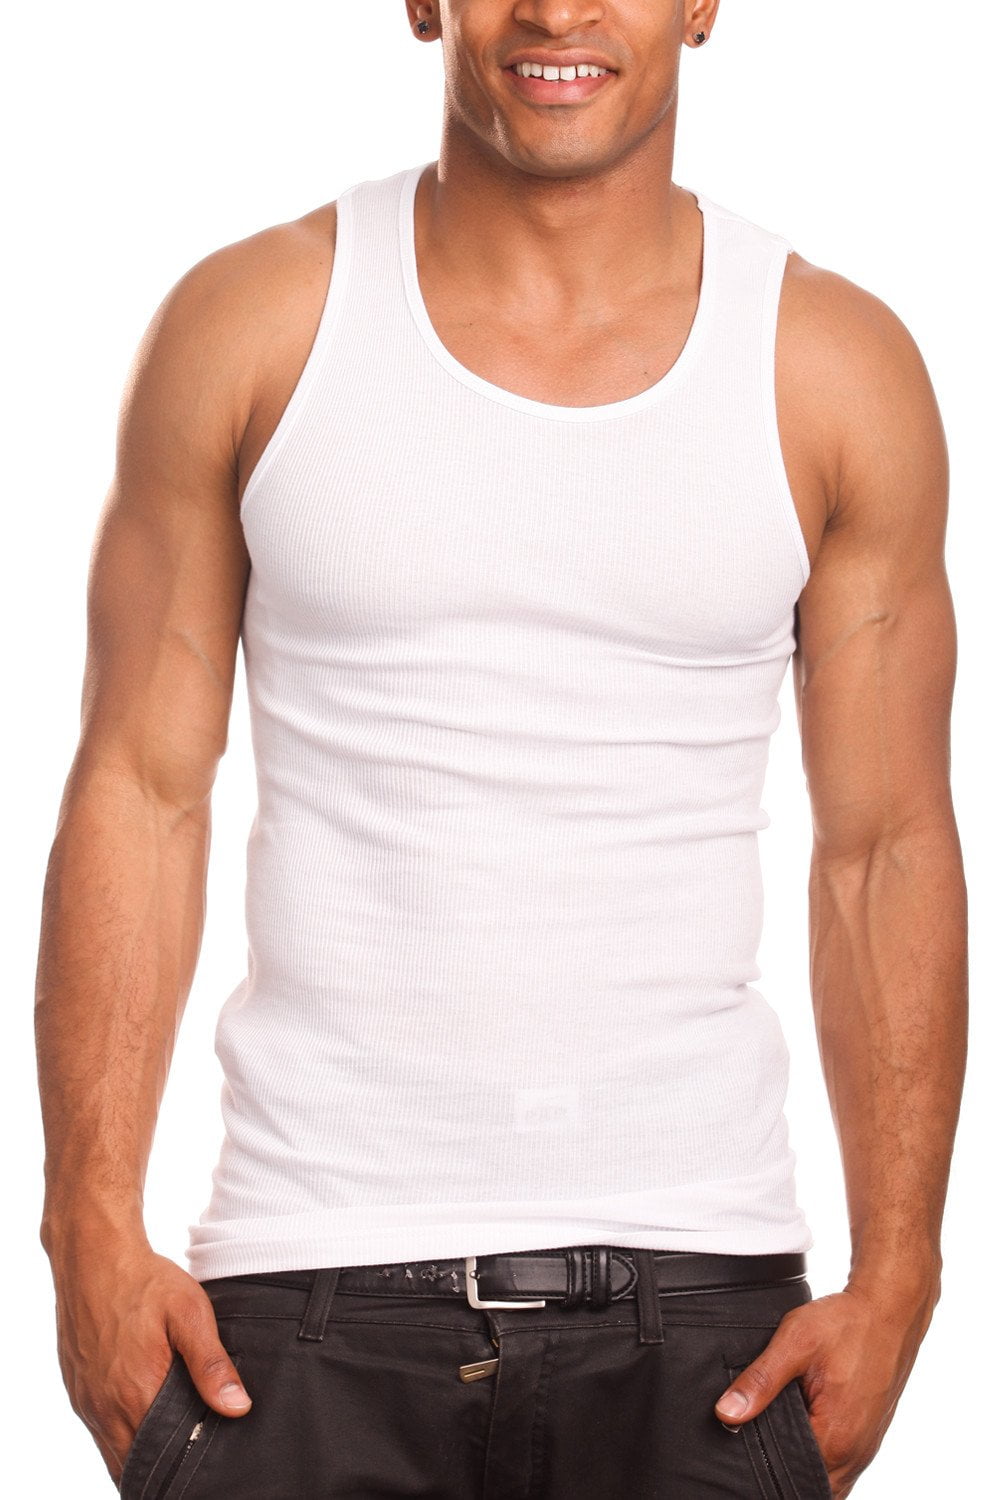 Men’s 6 Pack Tank Top A Shirt-100% Cotton Ribbed Undershirts-Multicolor &  Sleeveless Tees(White, Large)